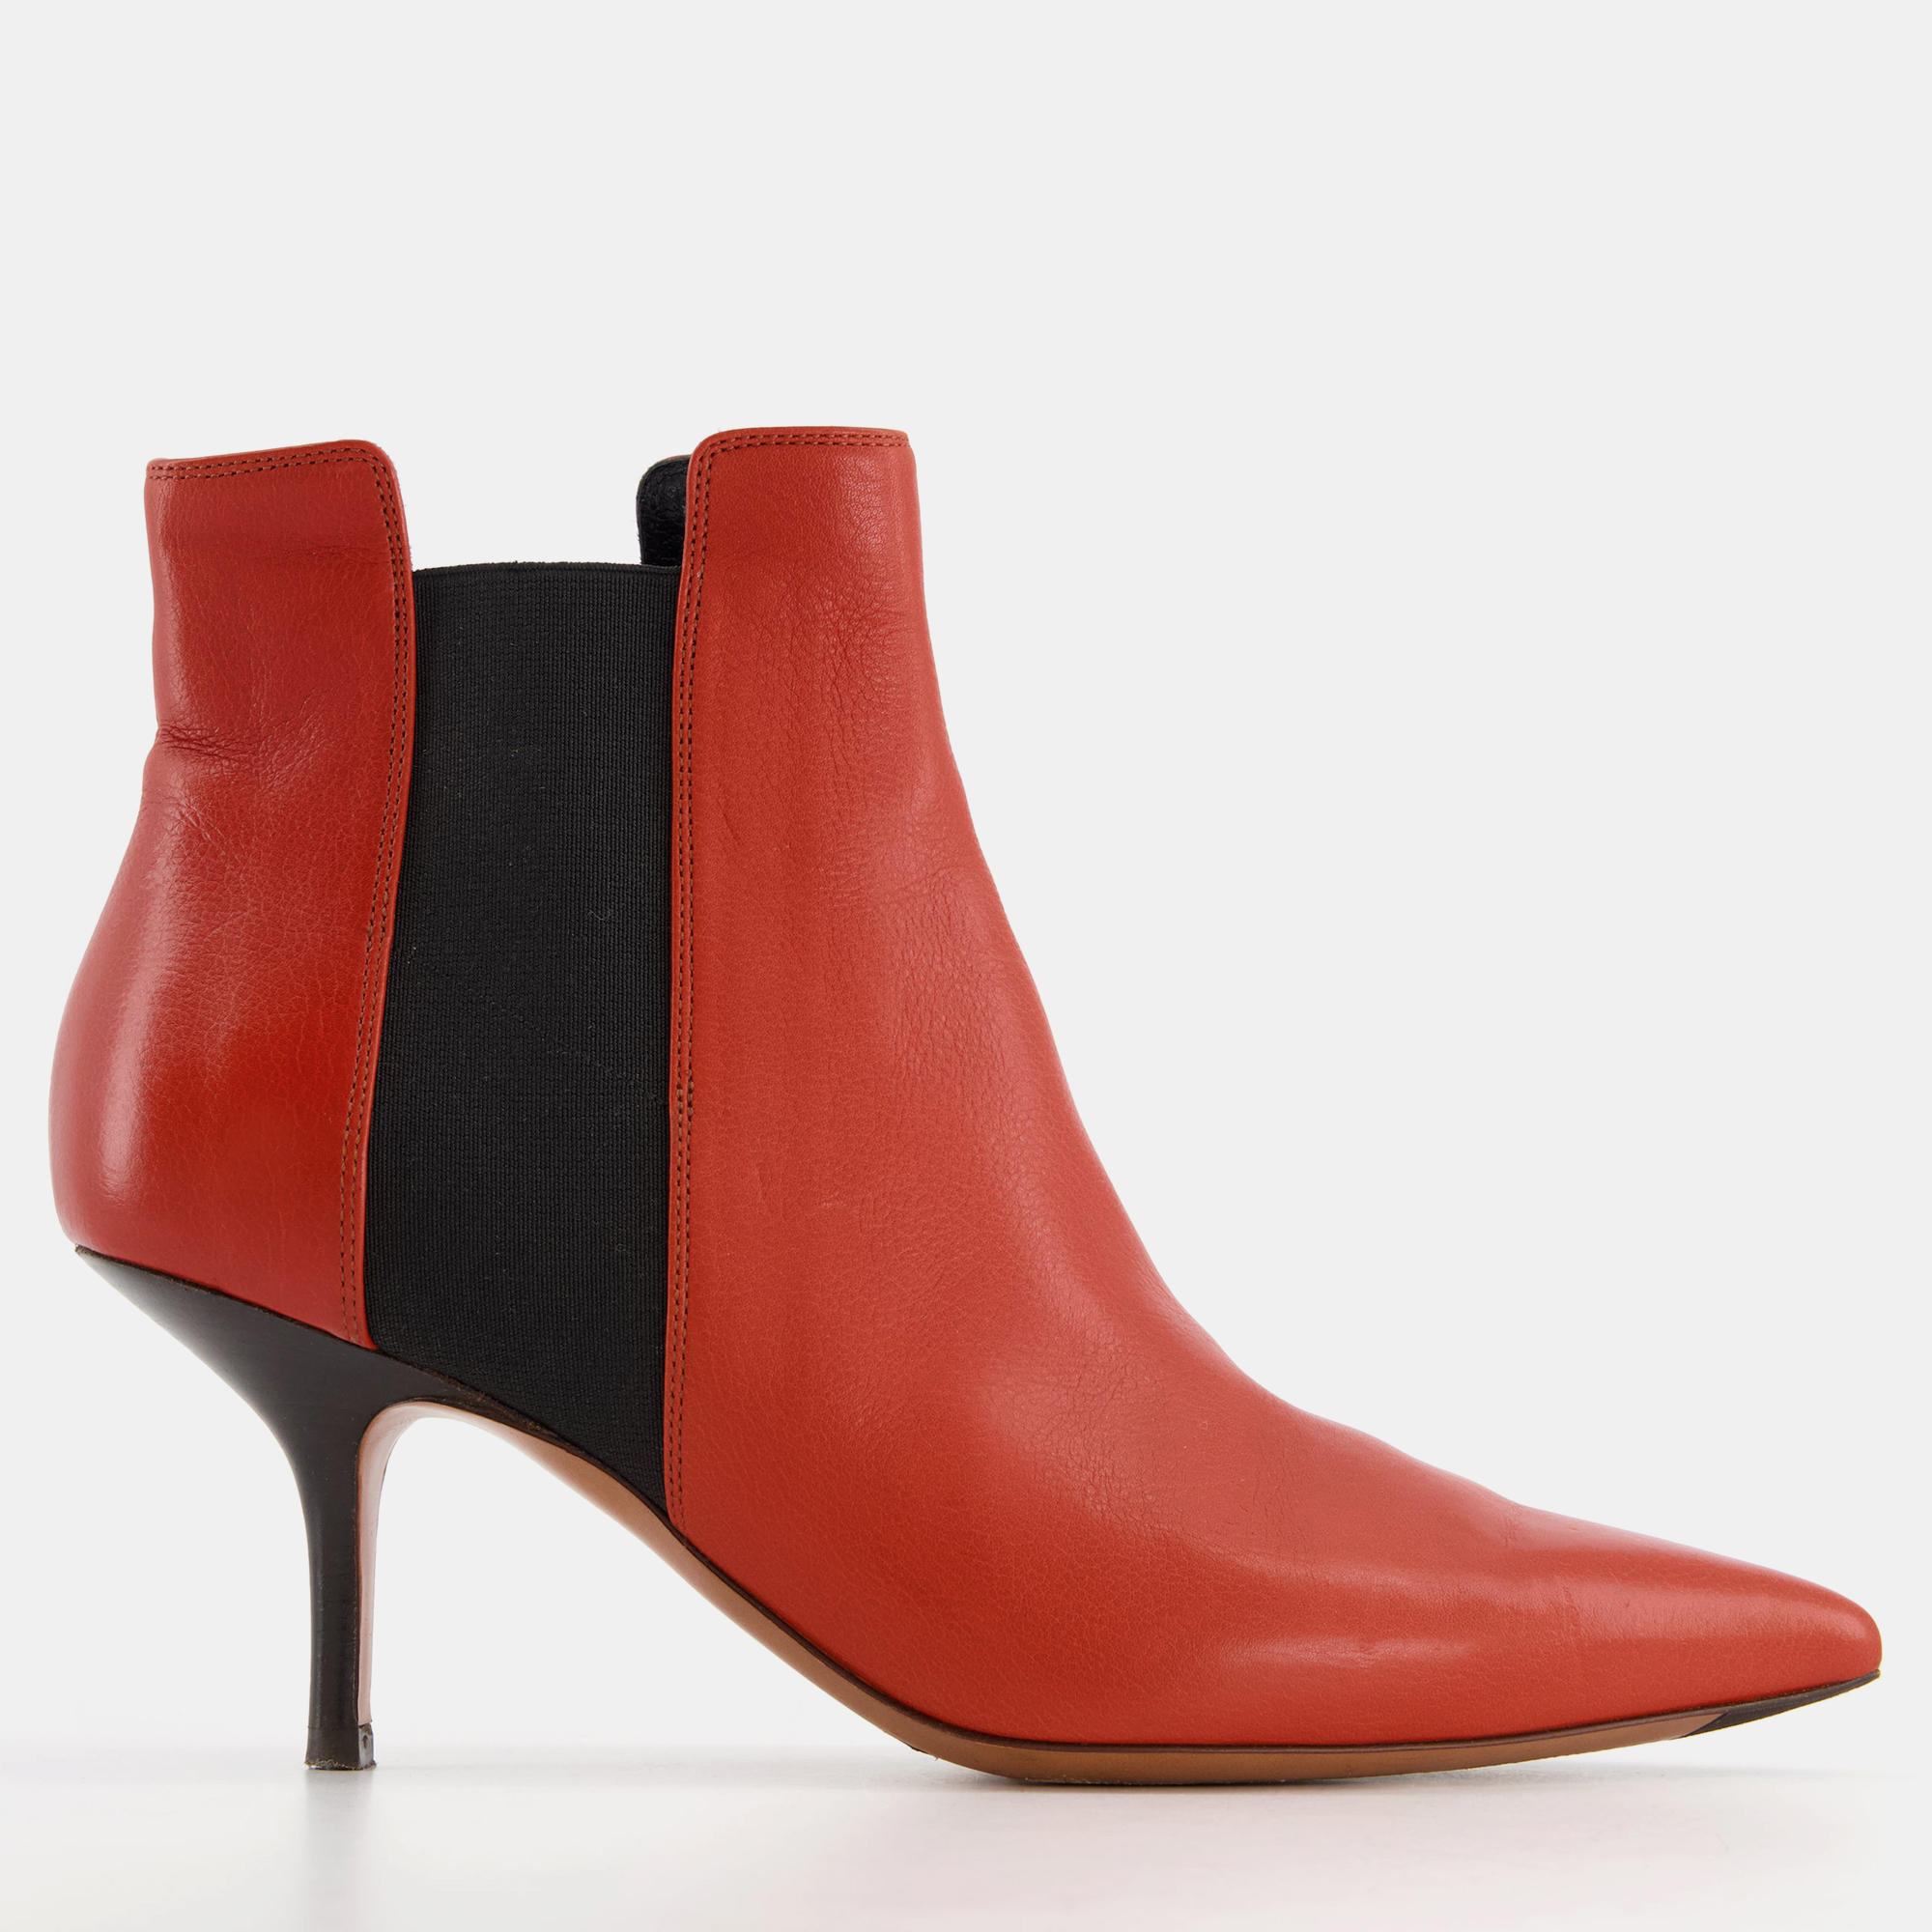 Celine red pointed ankle boots with kitten heel eu 36.5